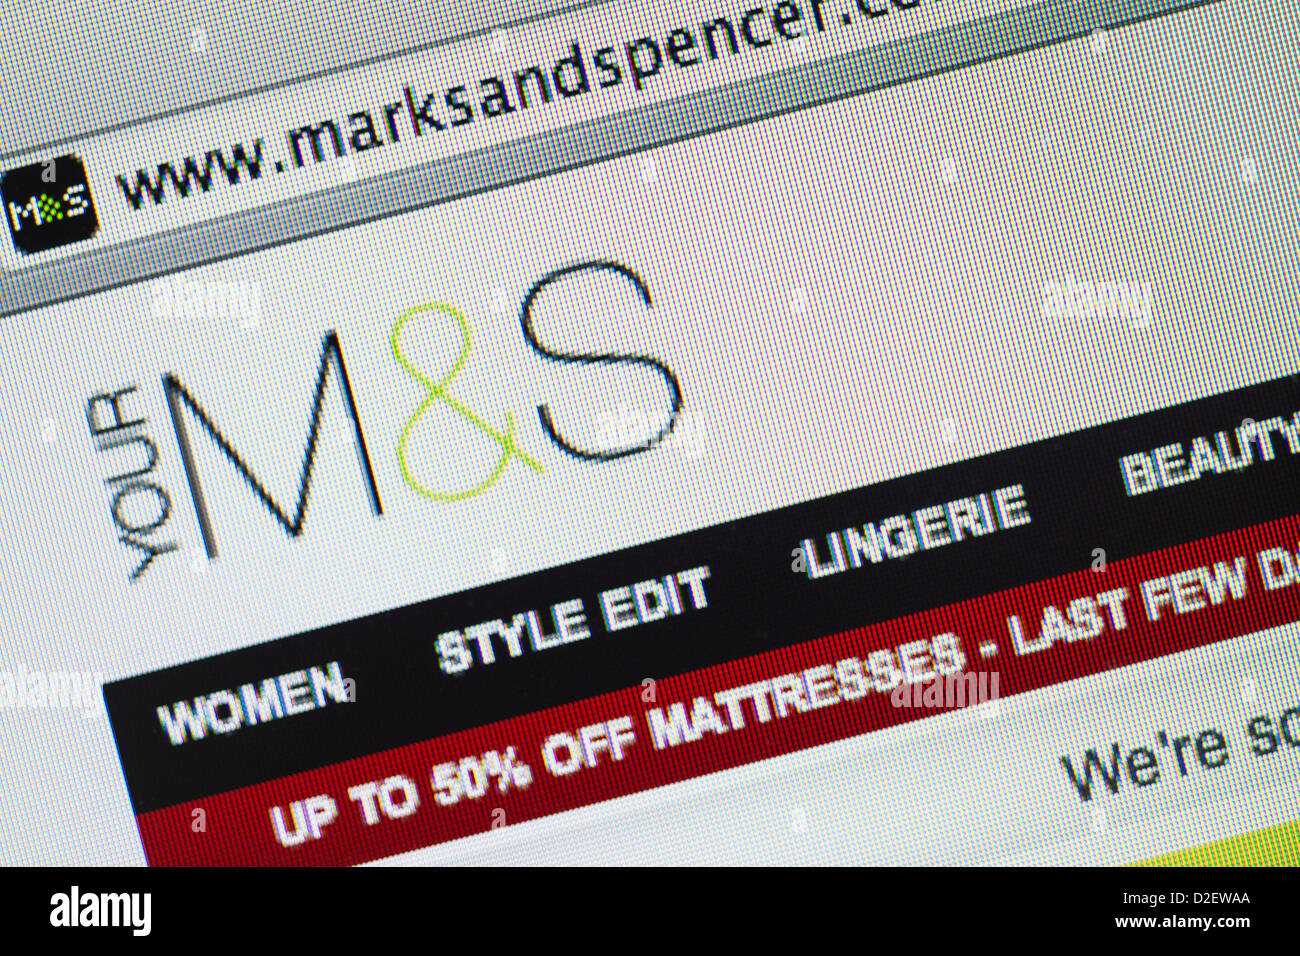 Marks and Spencer logo and website close up Stock Photo